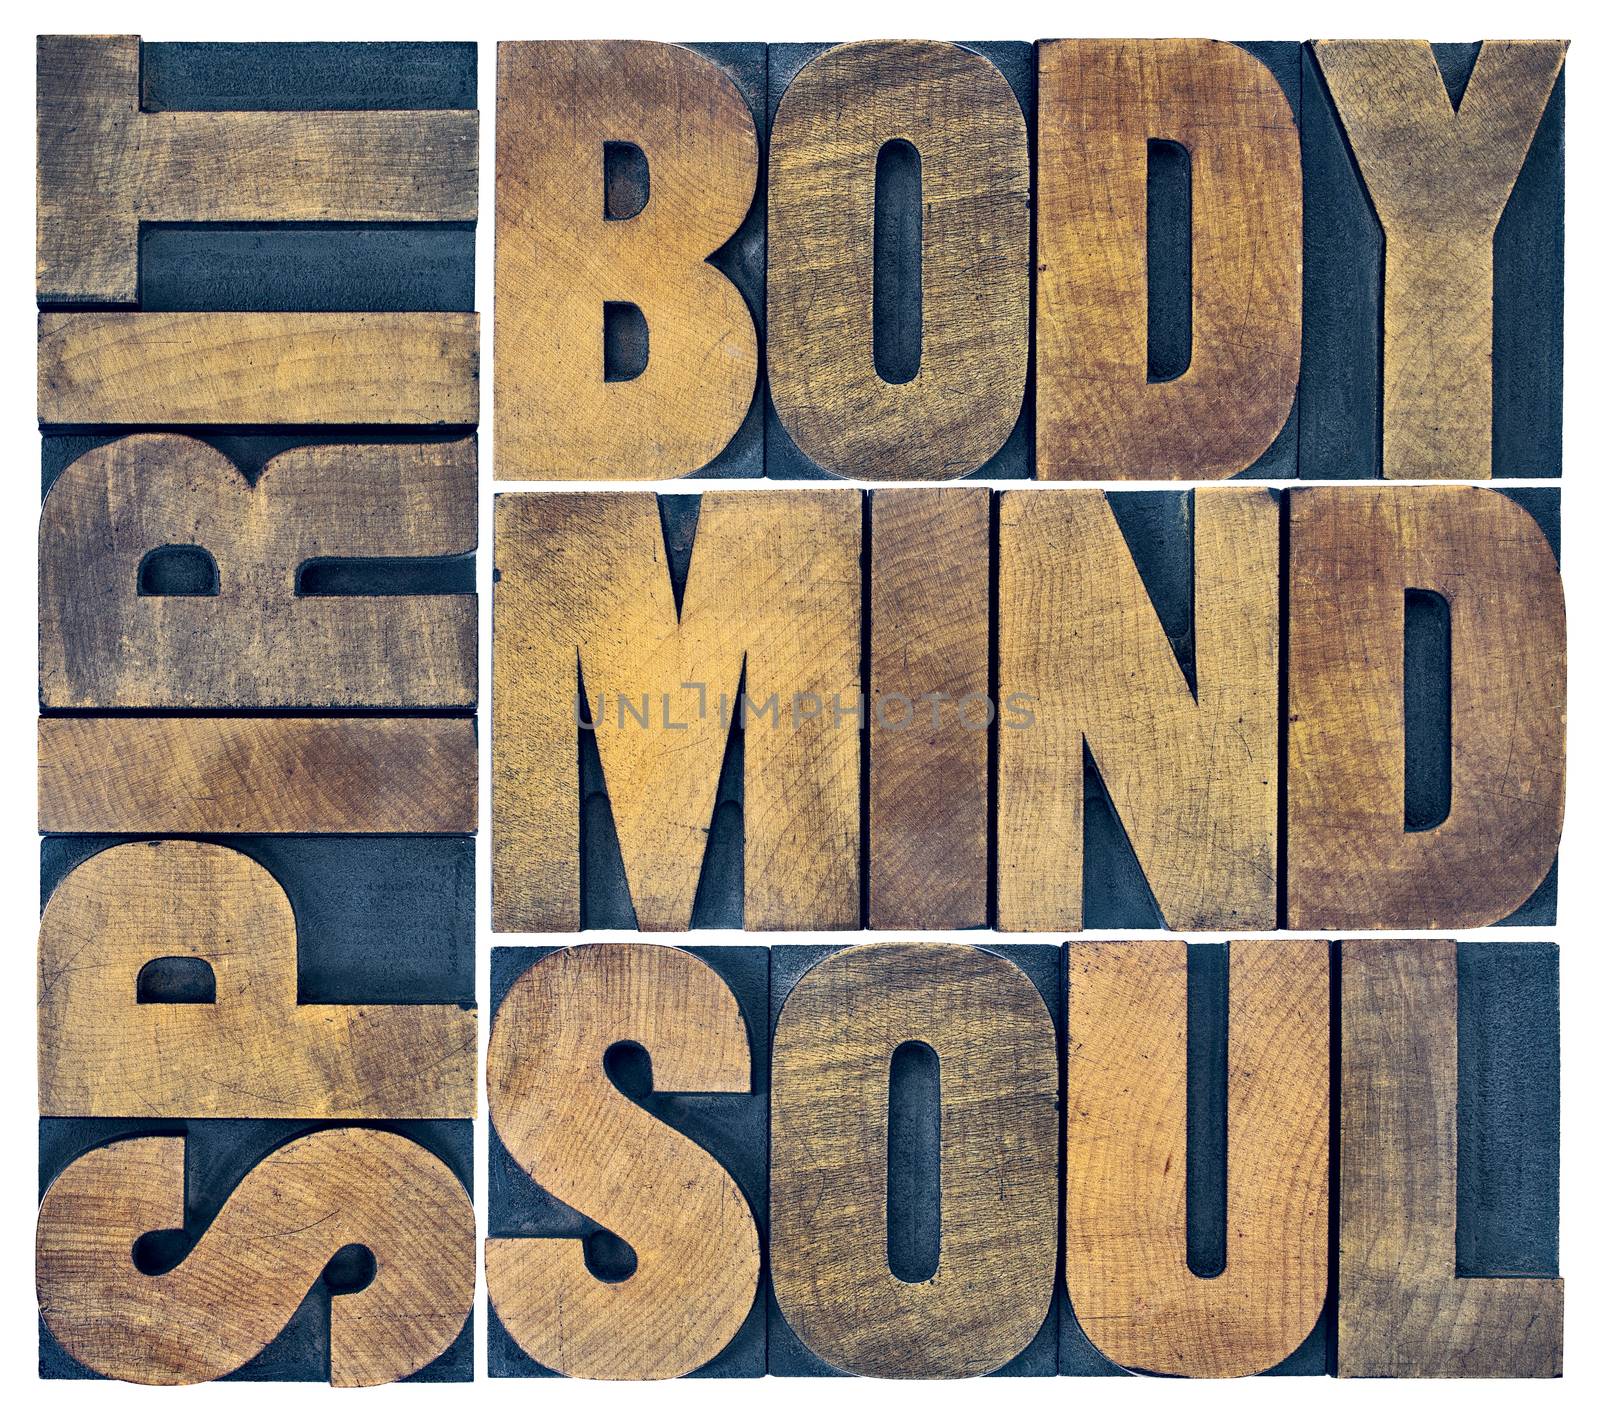 body, mind, soul and spirit in wood type by PixelsAway